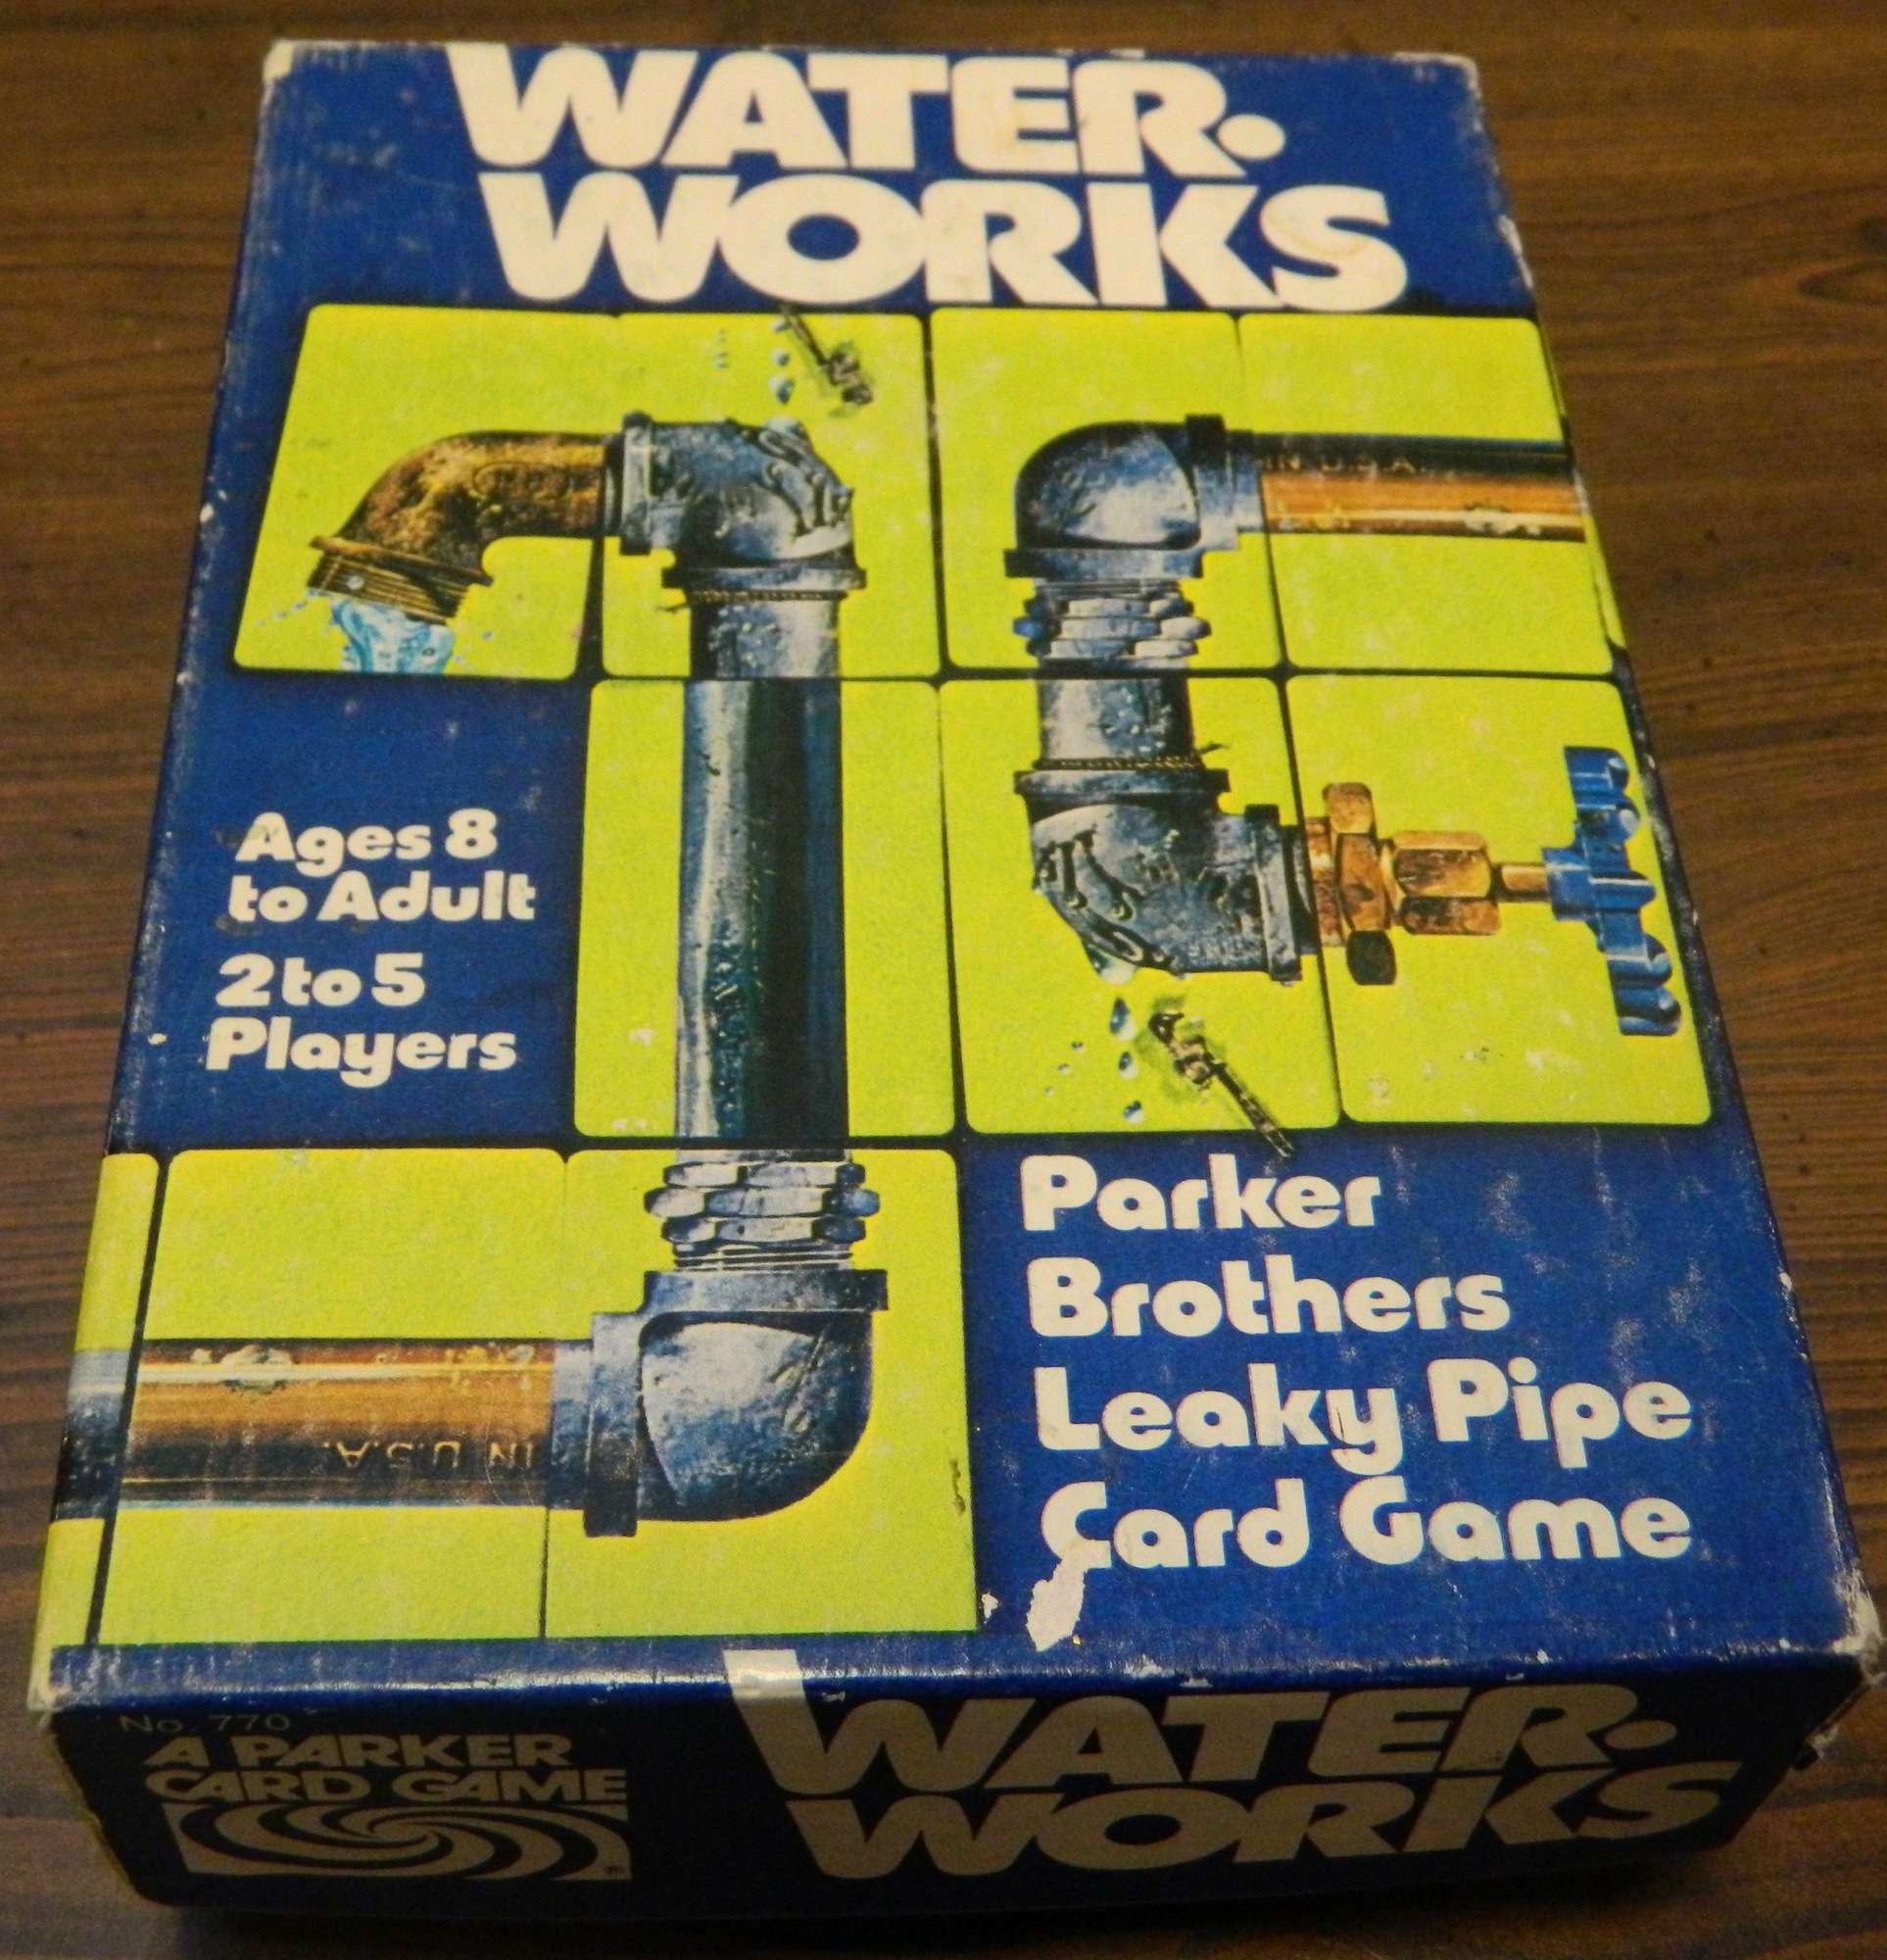 Waterworks Card Game Review and Rules